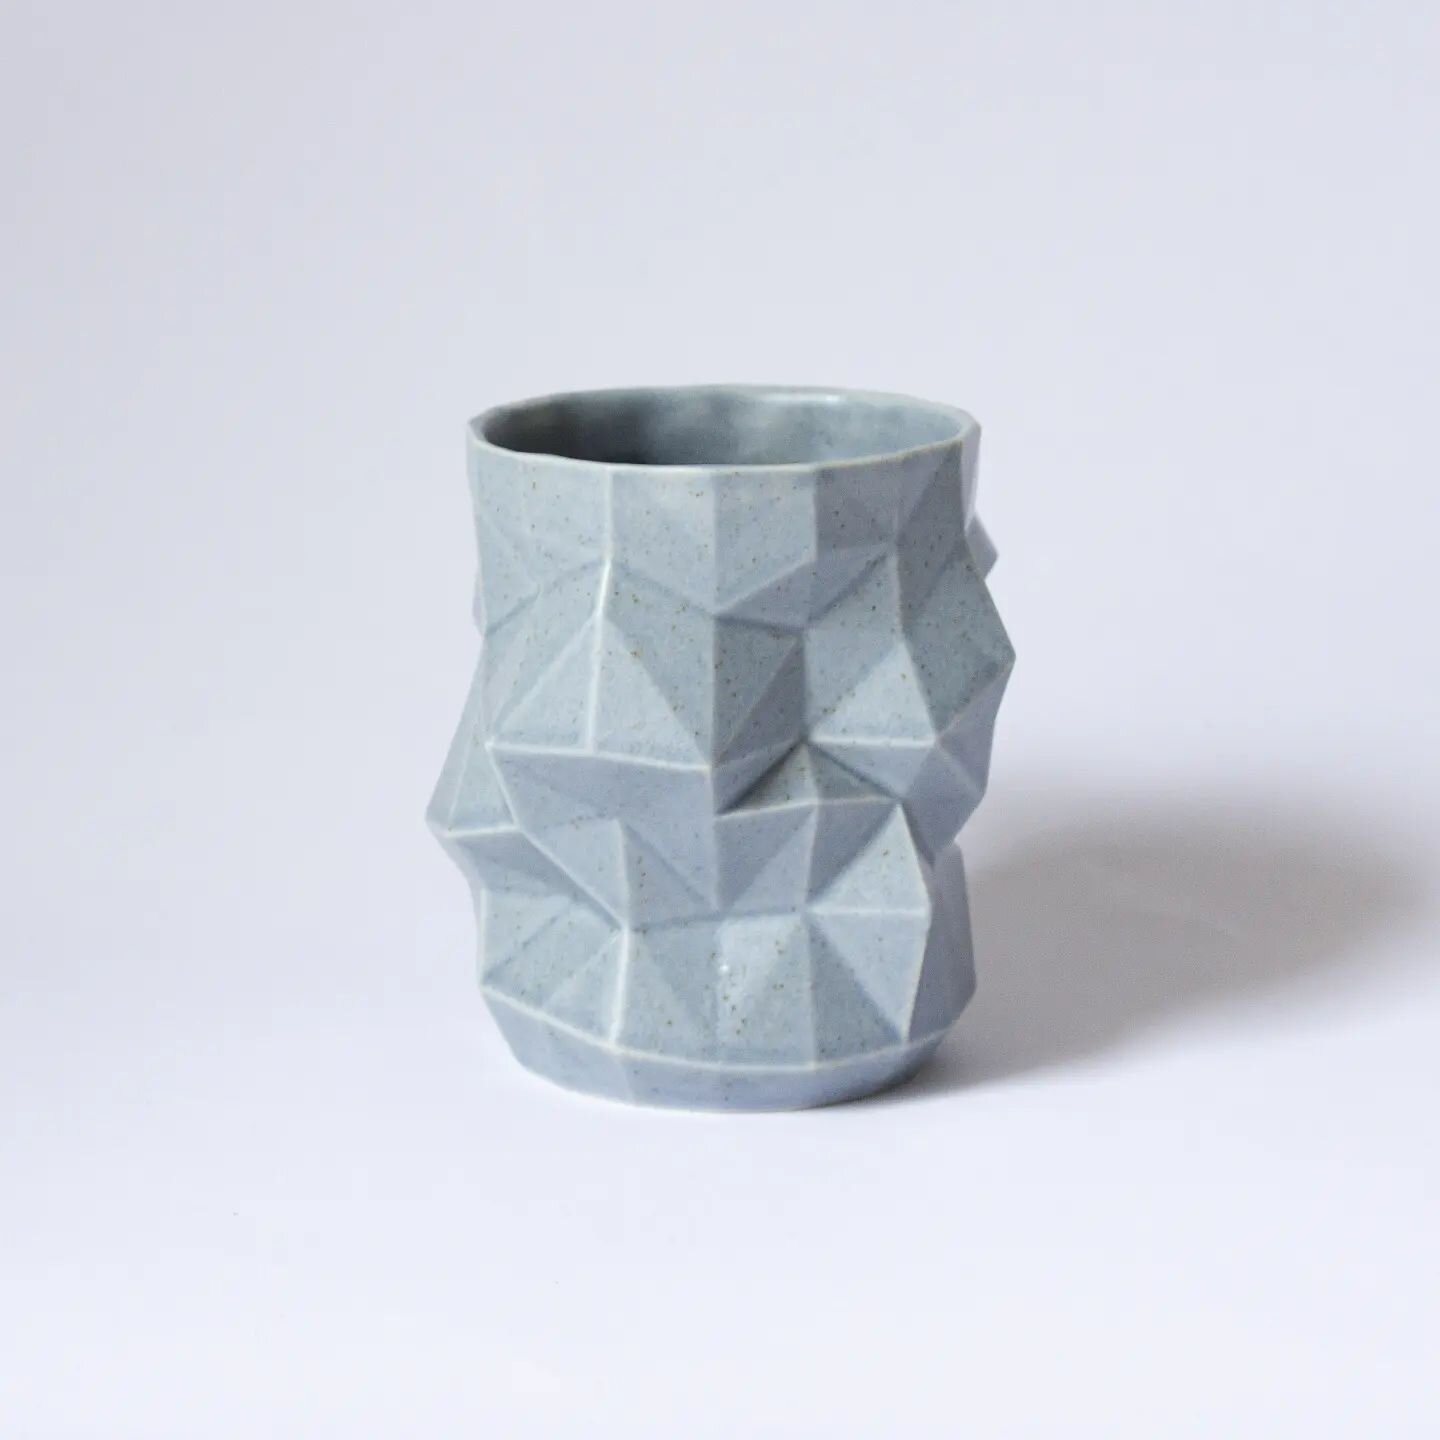 Squashed Geometry (front view)

Individual Cup, 

Satin blue/grey/green glaze

Dishwasher microwave and awesome safe. 

Currently I don't have any individual versions of these available on my website but if you would like one or this one. Just send a